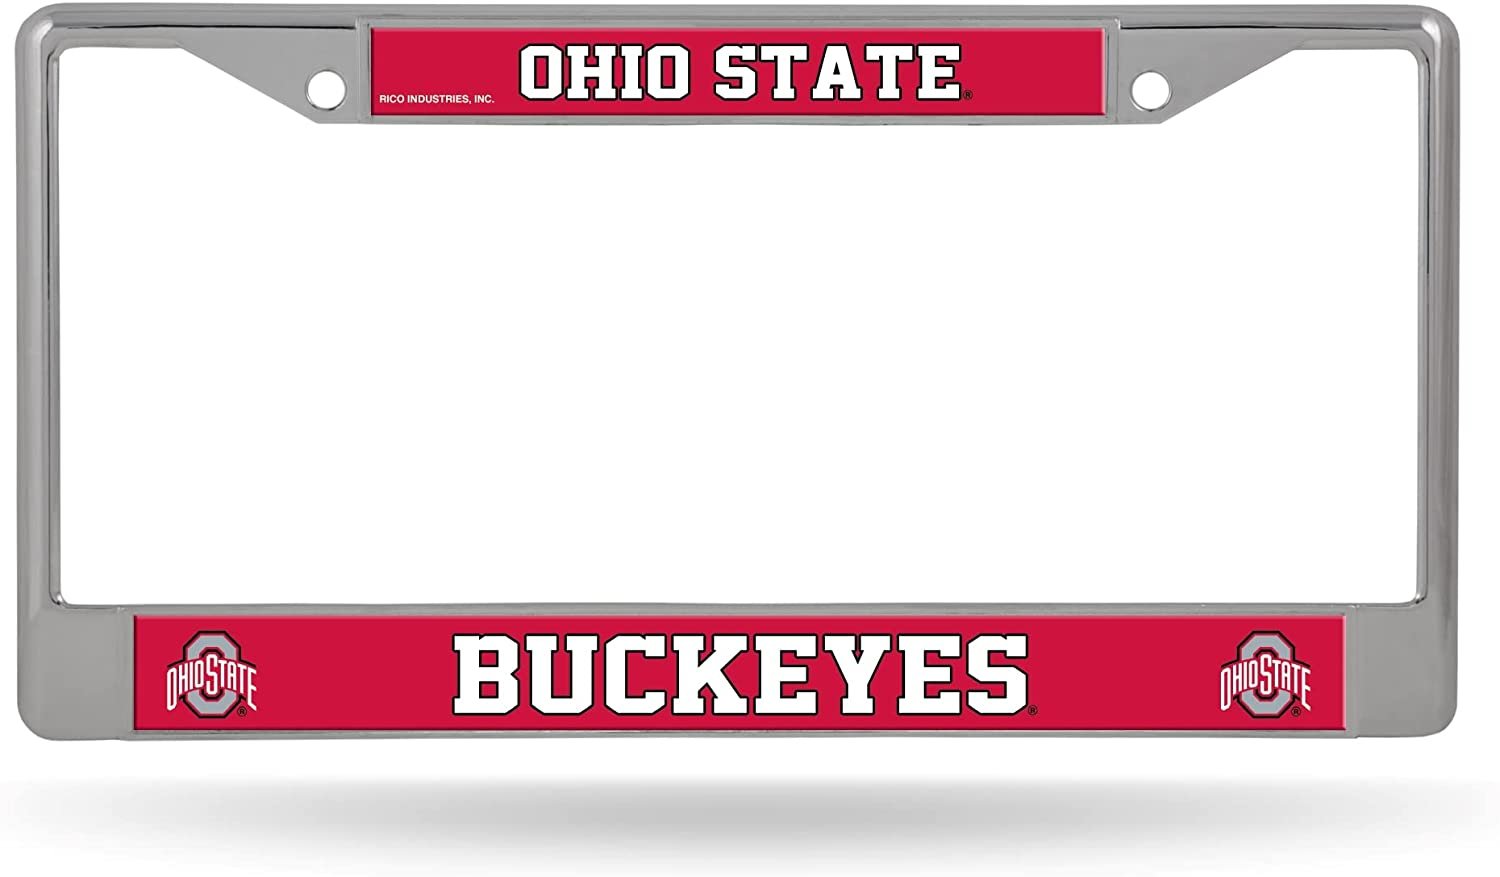 Ohio State Buckeyes Metal License Plate Frame Tag Cover University